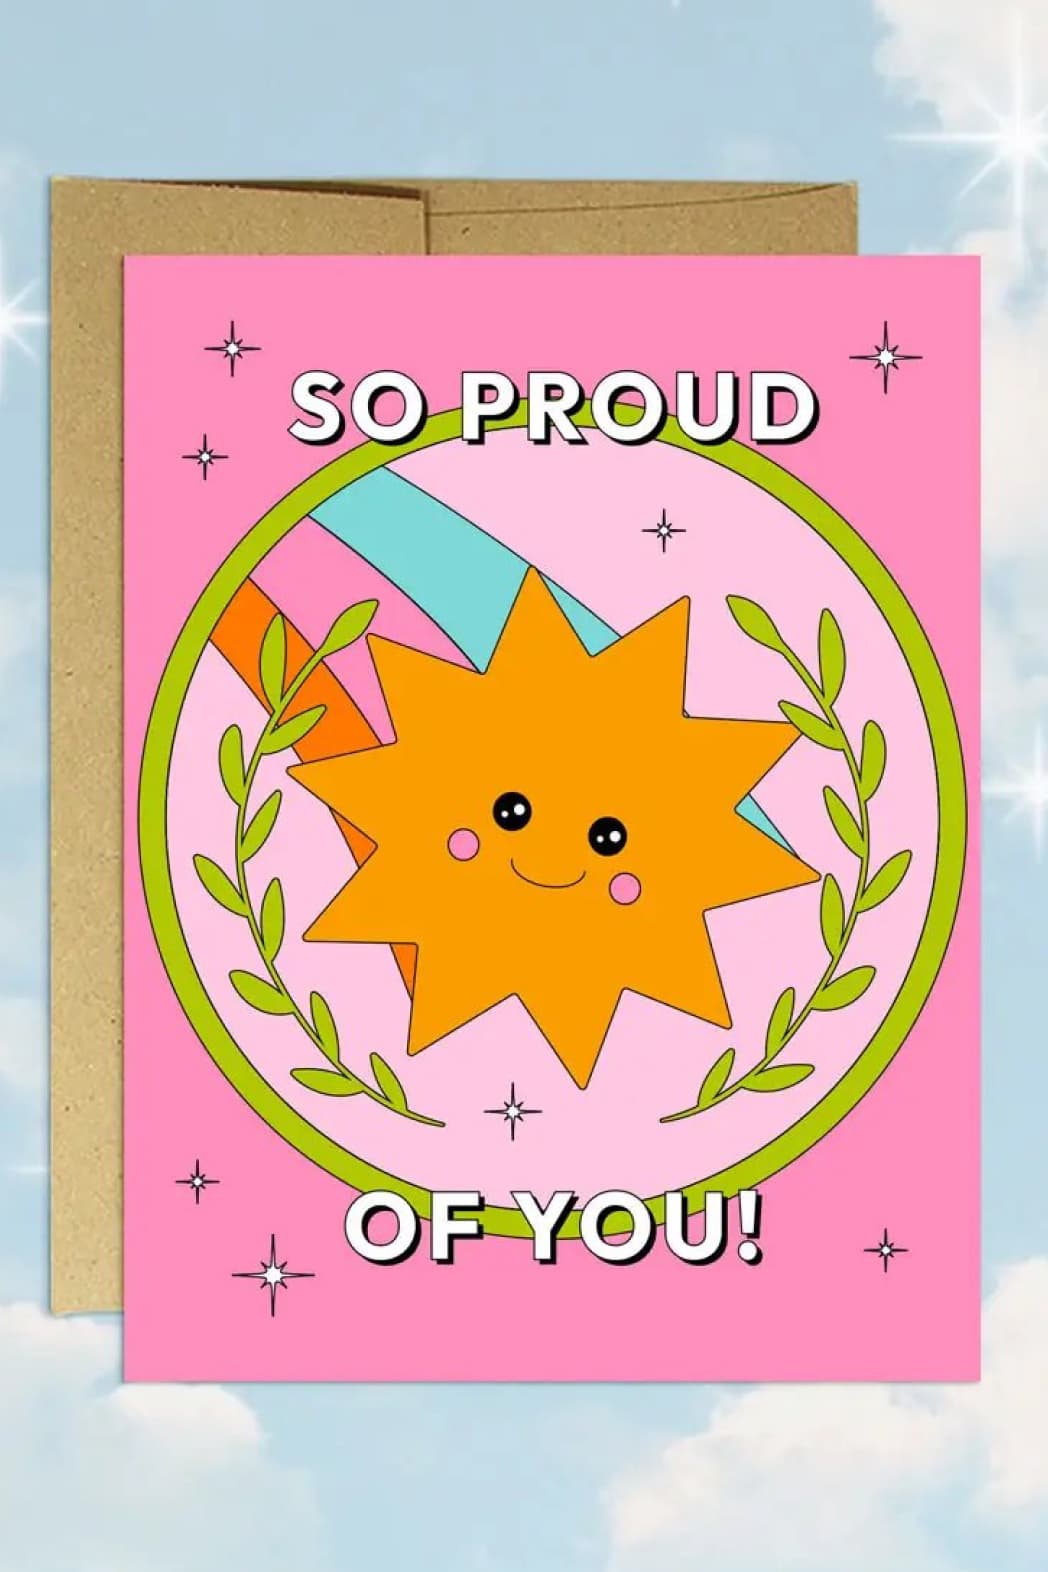 So Proud Of You Encouragement Card - Greeting & Note Cards